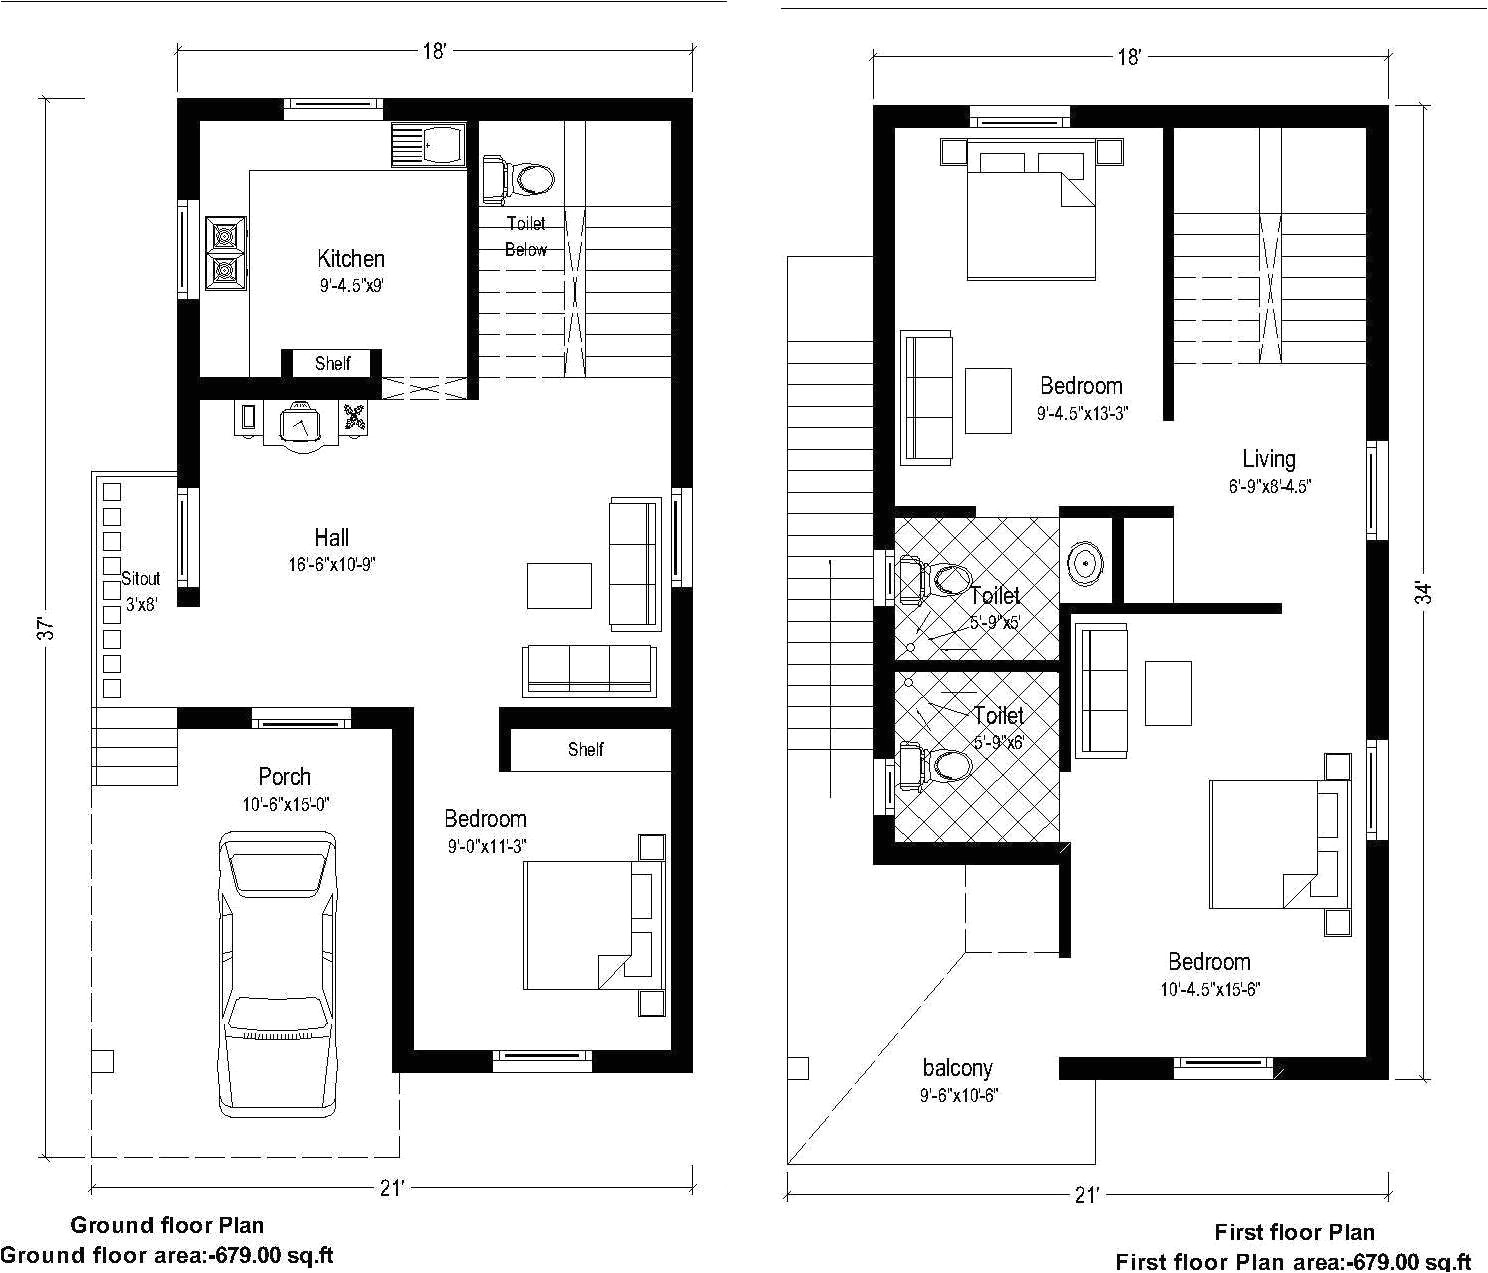 30 40 house plan 20 x 40 house plans new 20 x 40 house plans image result for 30 by